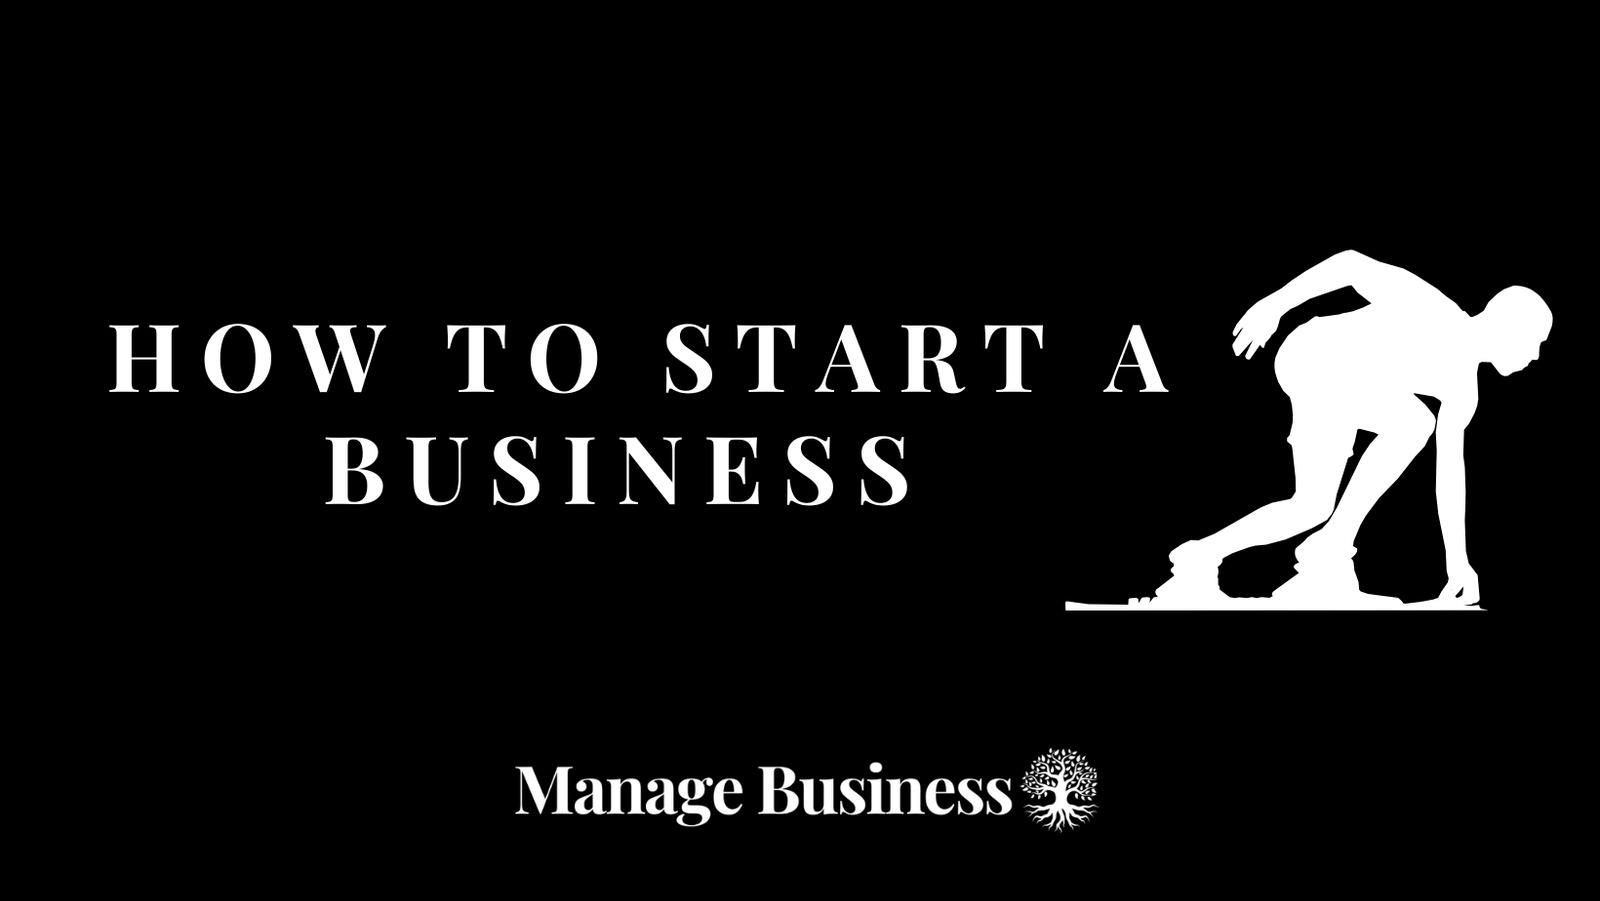 How to Start a Business - Manage Business